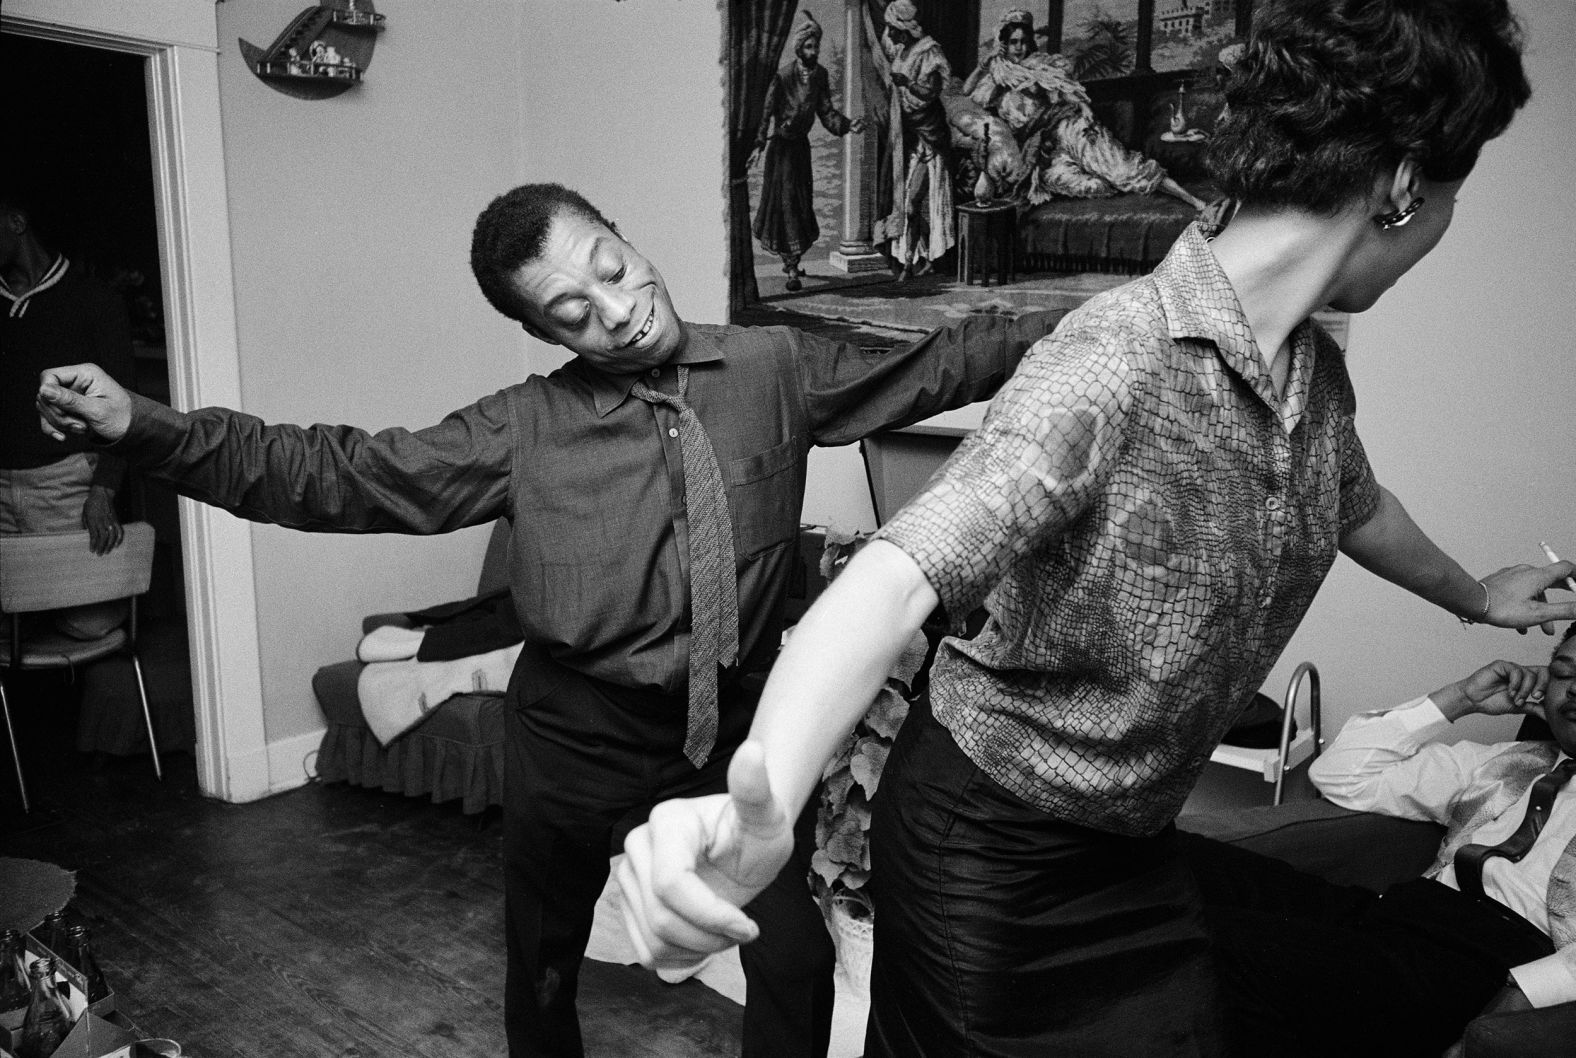 Writer James Baldwin dances in New Orleans with a woman who worked for the Congress of Racial Equality. "Baldwin introduced me to the civil rights movement," <a href="index.php?page=&url=https%3A%2F%2Floeildelaphotographie.com%2Fen%2Fin-memoriam-james-baldwin-steve-schapiro-the-fire-next-time-dv%2F" target="_blank" target="_blank">Schapiro wrote.</a> "I read his article about the conditions of Blacks in America, which later became 'The Fire Next Time,' and immediately called my editor at Life asking if I could do a photo essay on Baldwin. He struck me as someone who was particularly charismatic in the way he was influencing a very important subject."